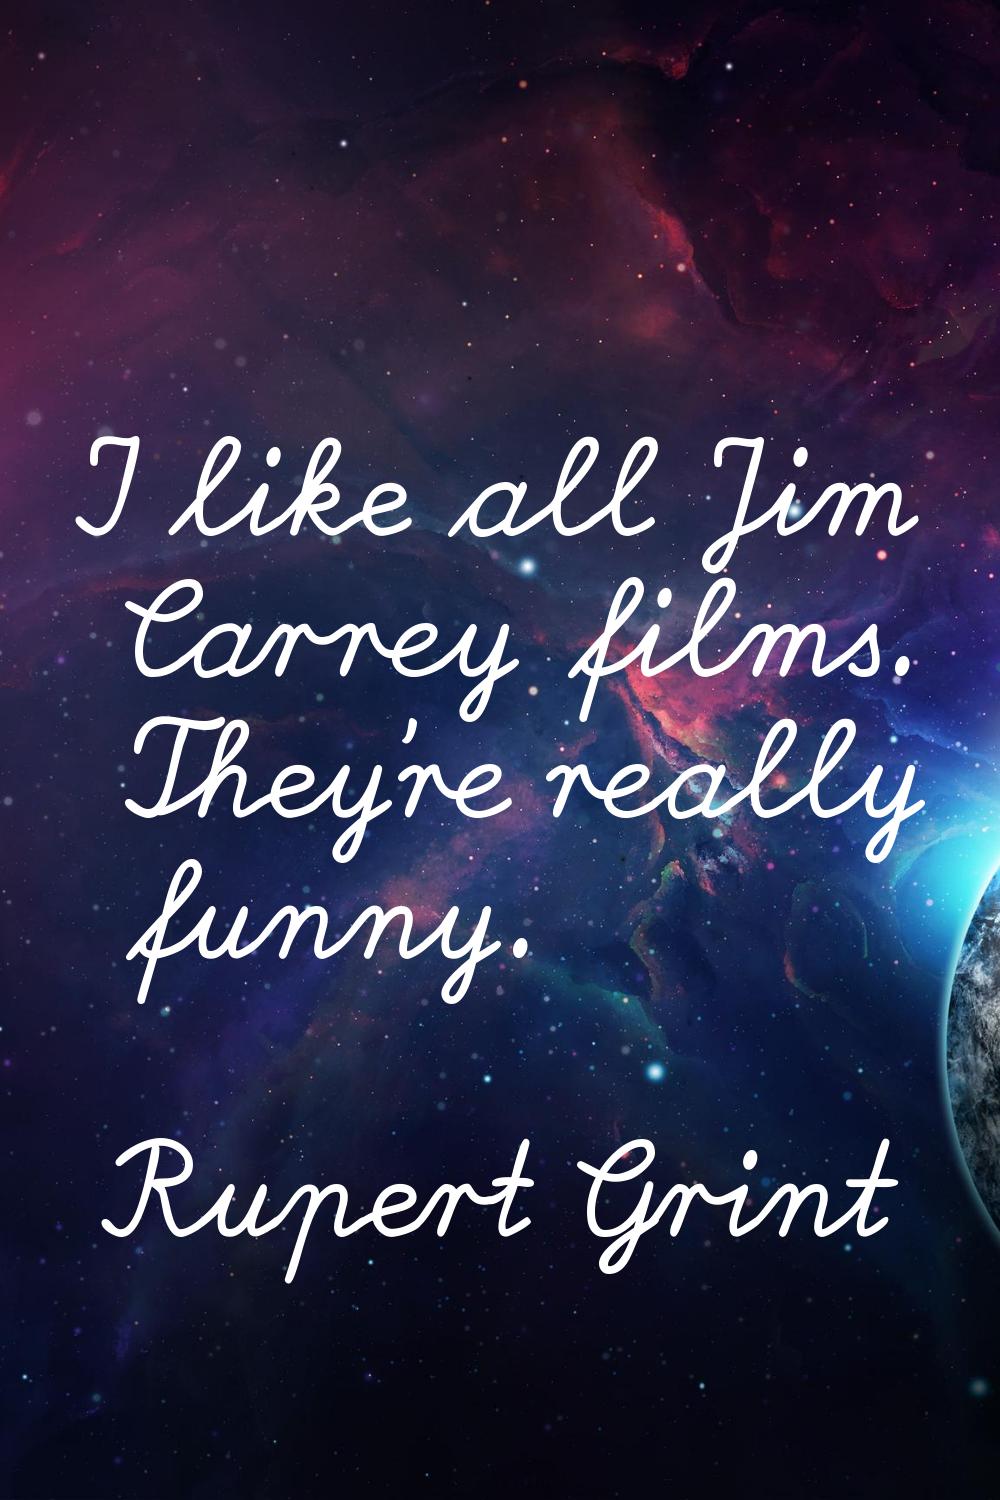 I like all Jim Carrey films. They're really funny.